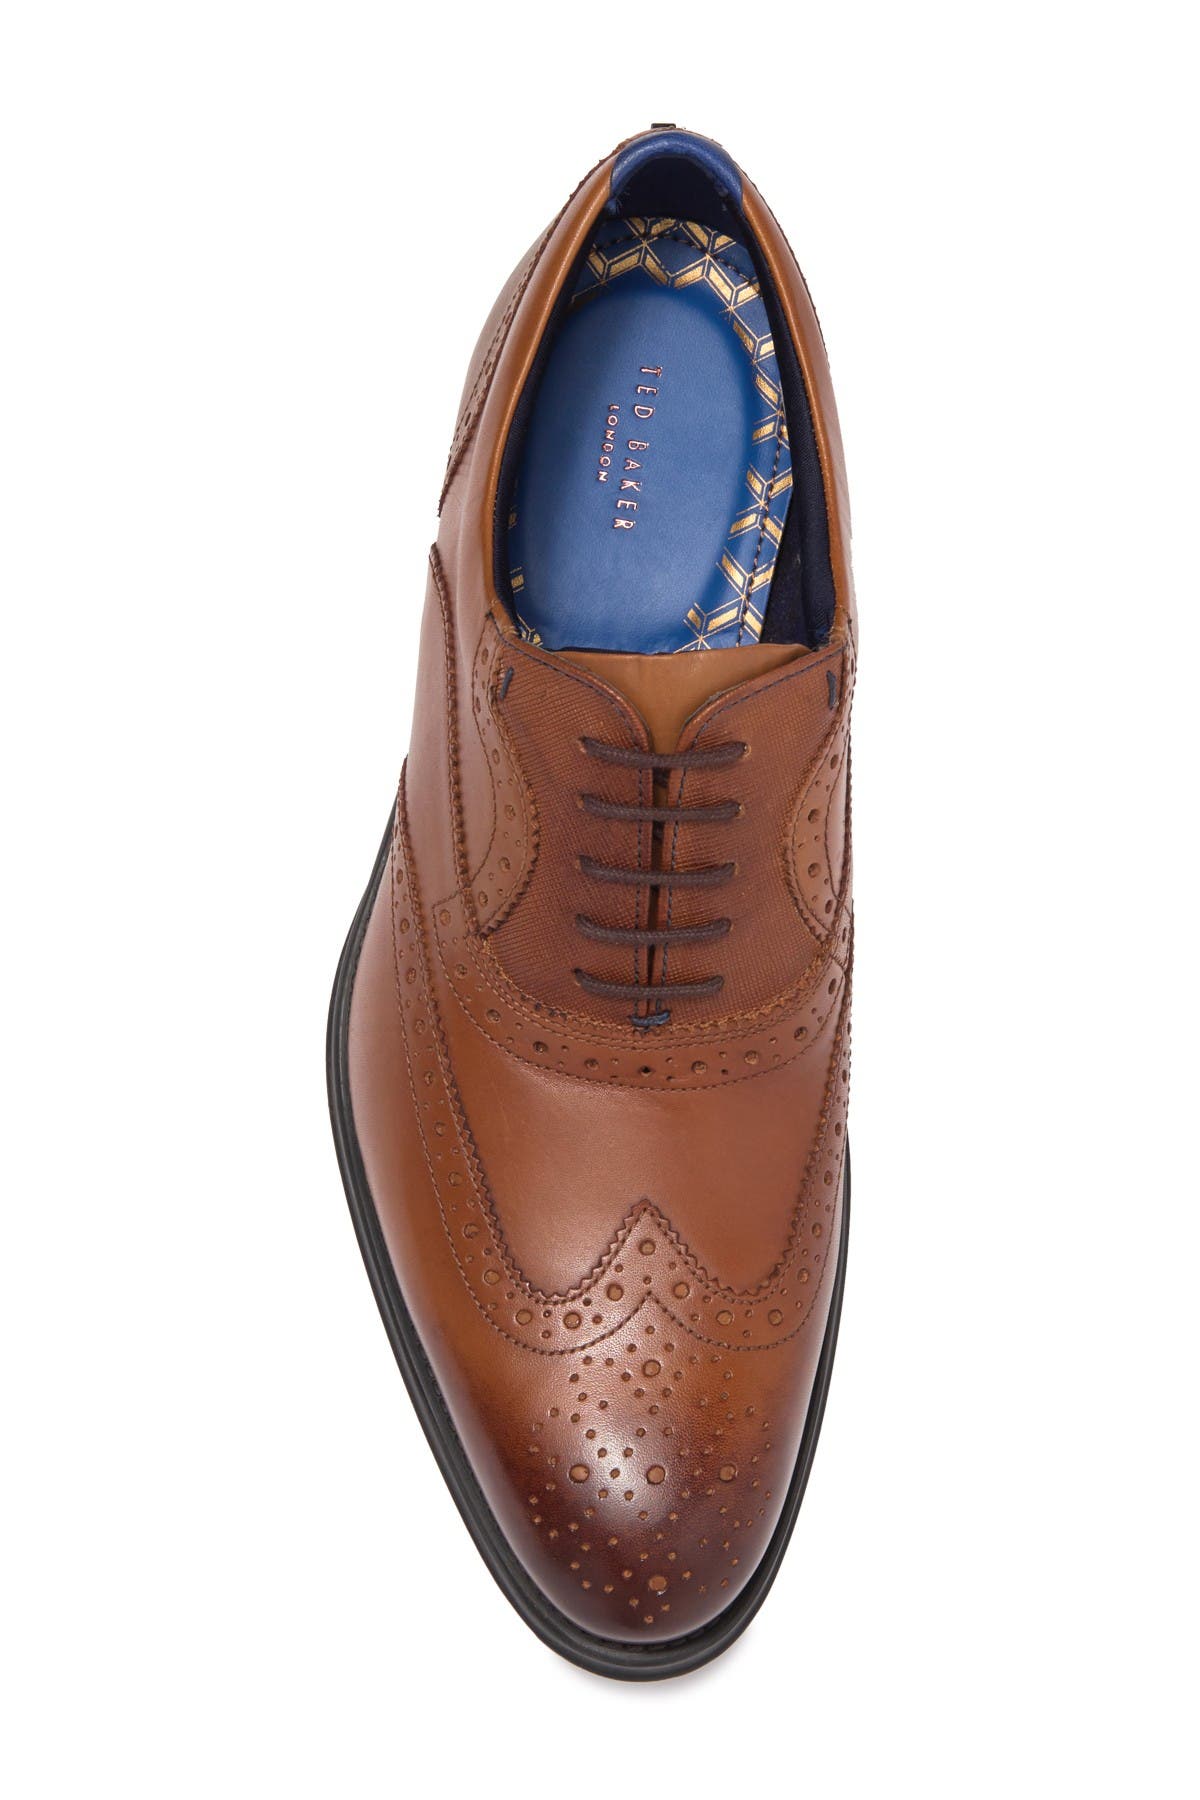 ted baker mitack shoes